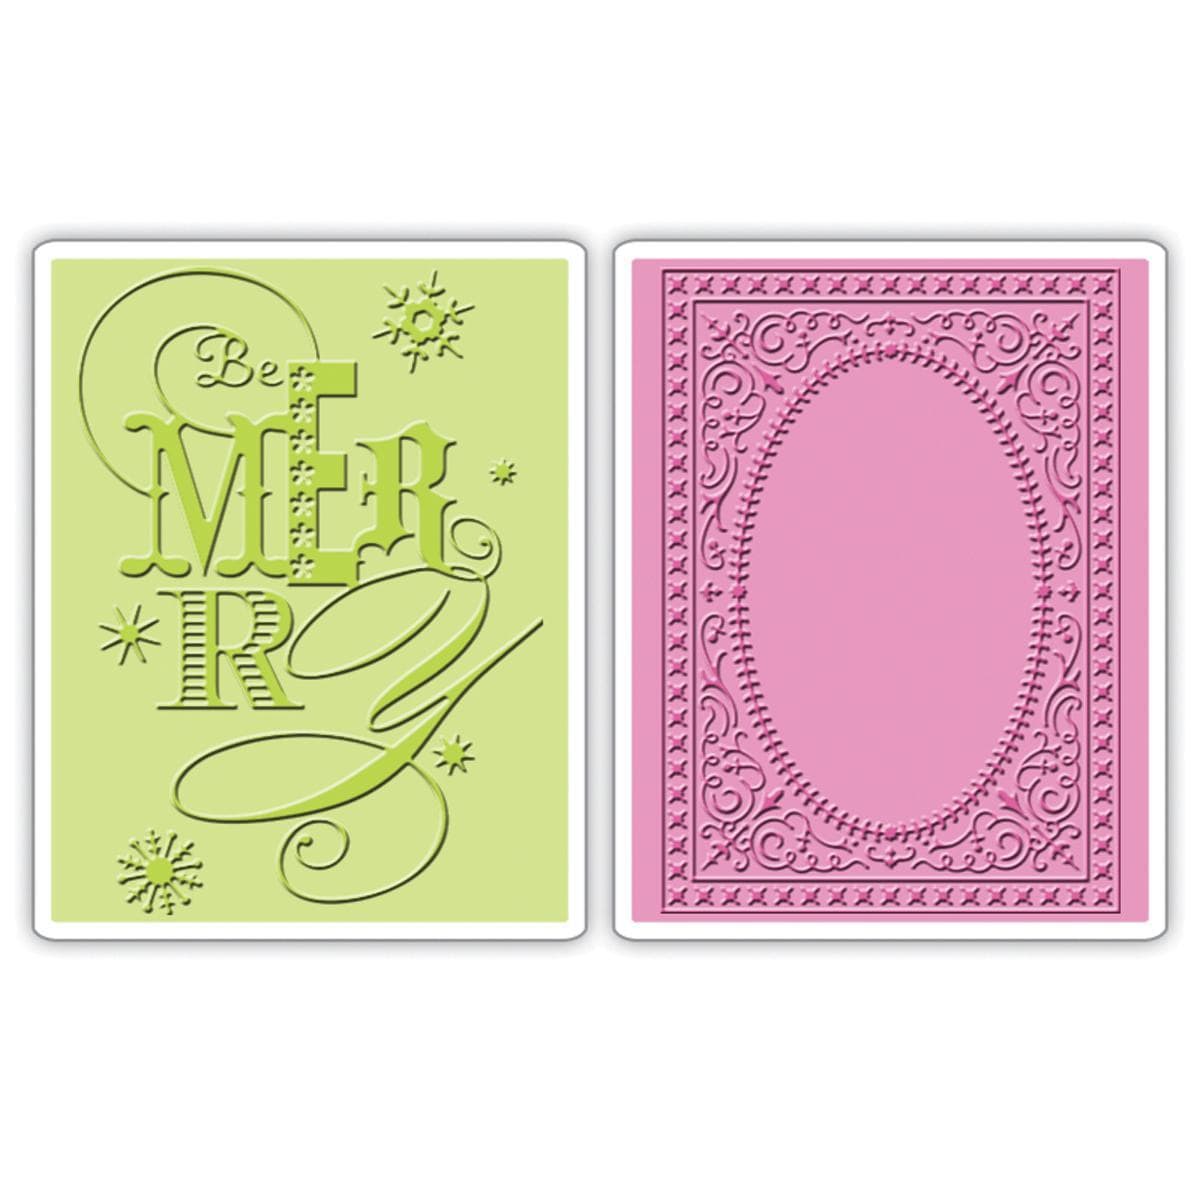 Sizzix Textured Impressions A6 Embossing Folders 2/pkg  Be Merry